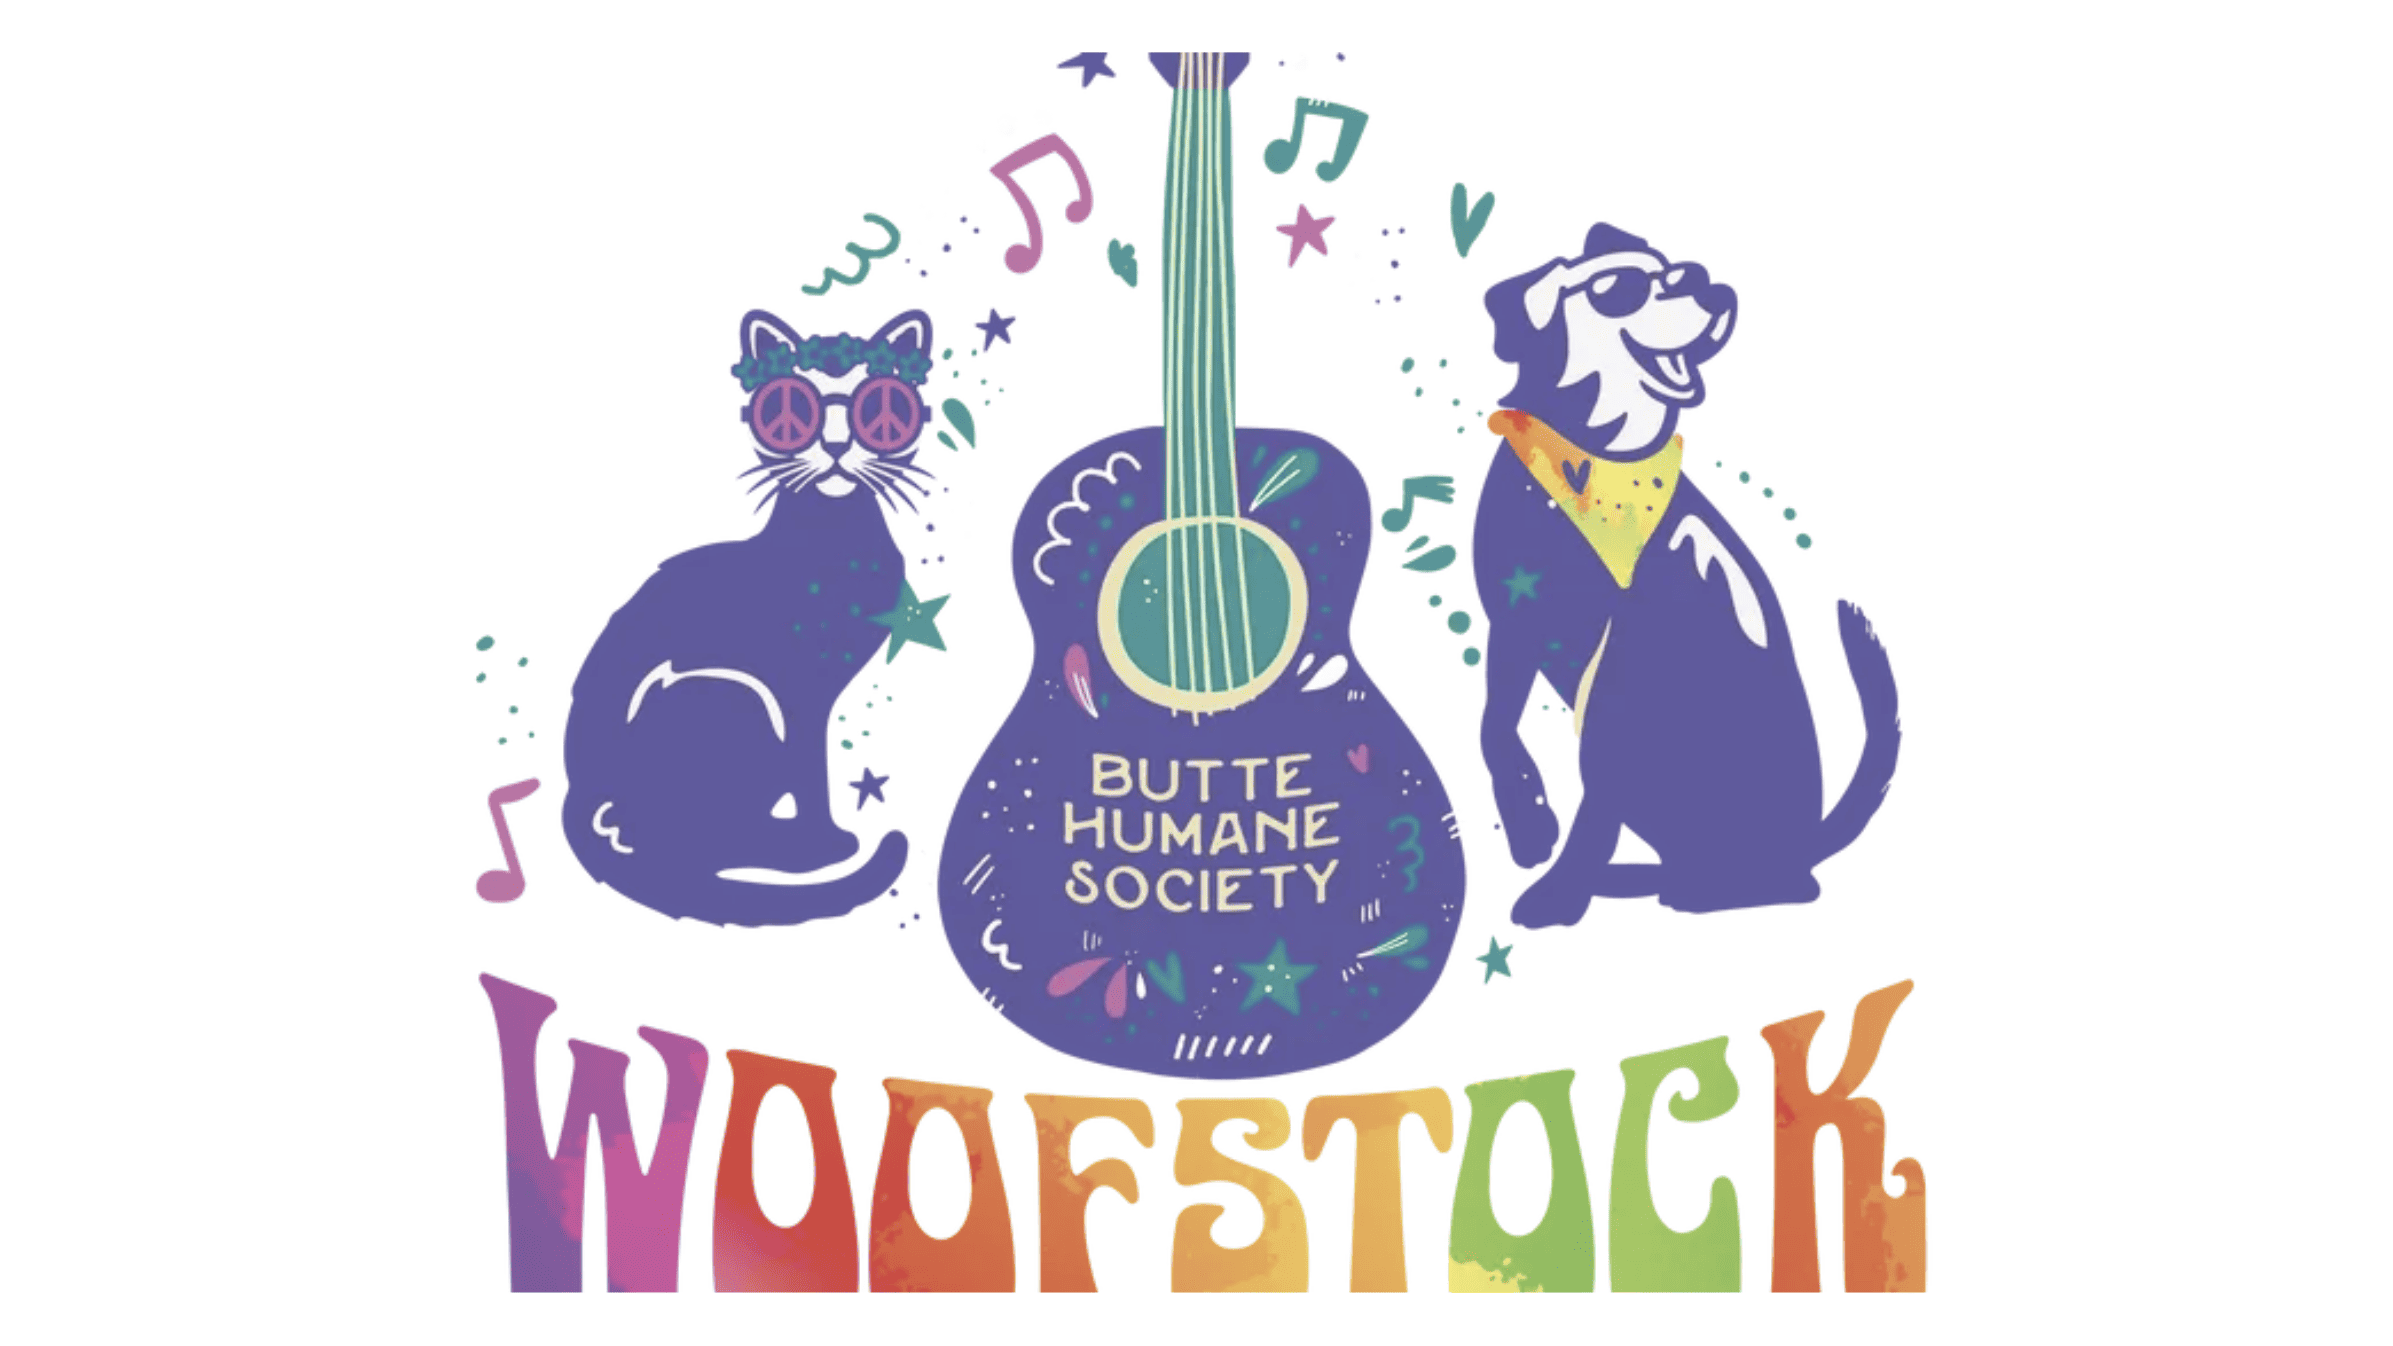 The Woofstock logo chiefly showcases the spirit of the festival, incorporating elements that represent Chico, a beloved mascot of the event. - Dogtrekker